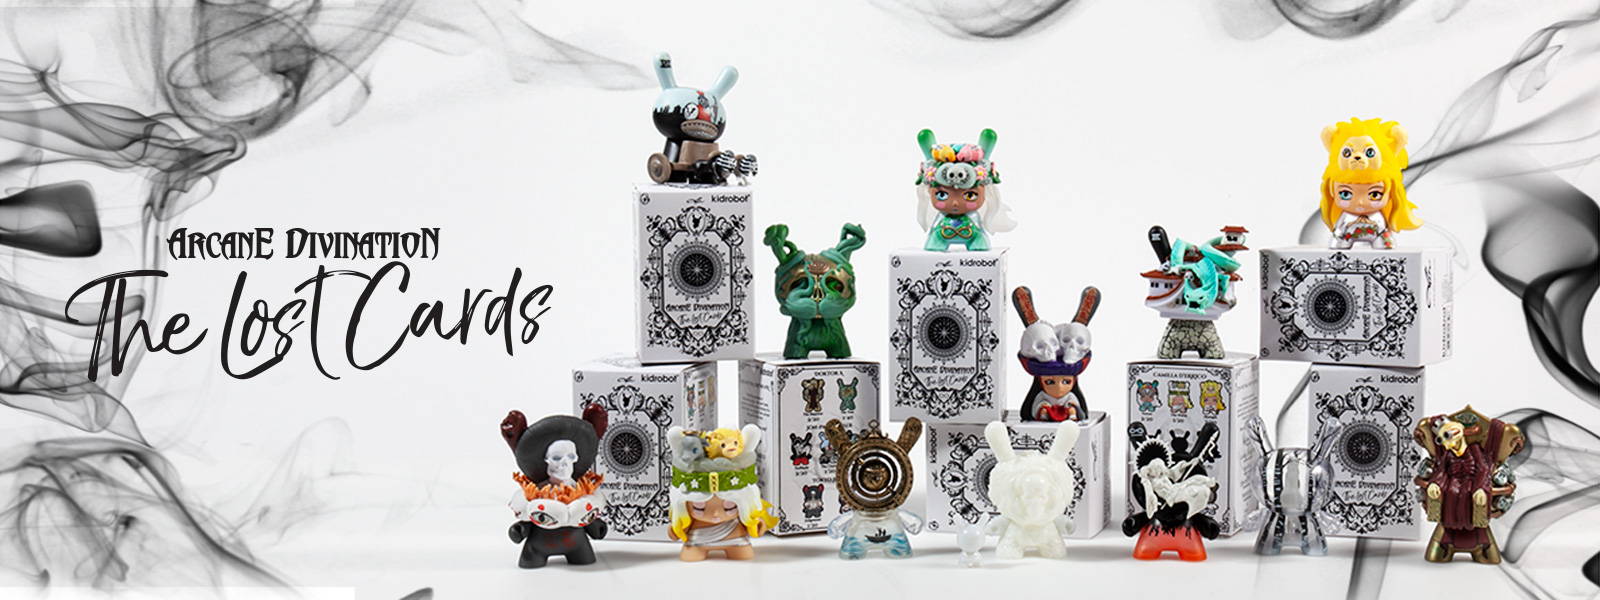 The World by Camilla d'Errico Arcane Divination The Lost Cards Dunny x Kidrobot 